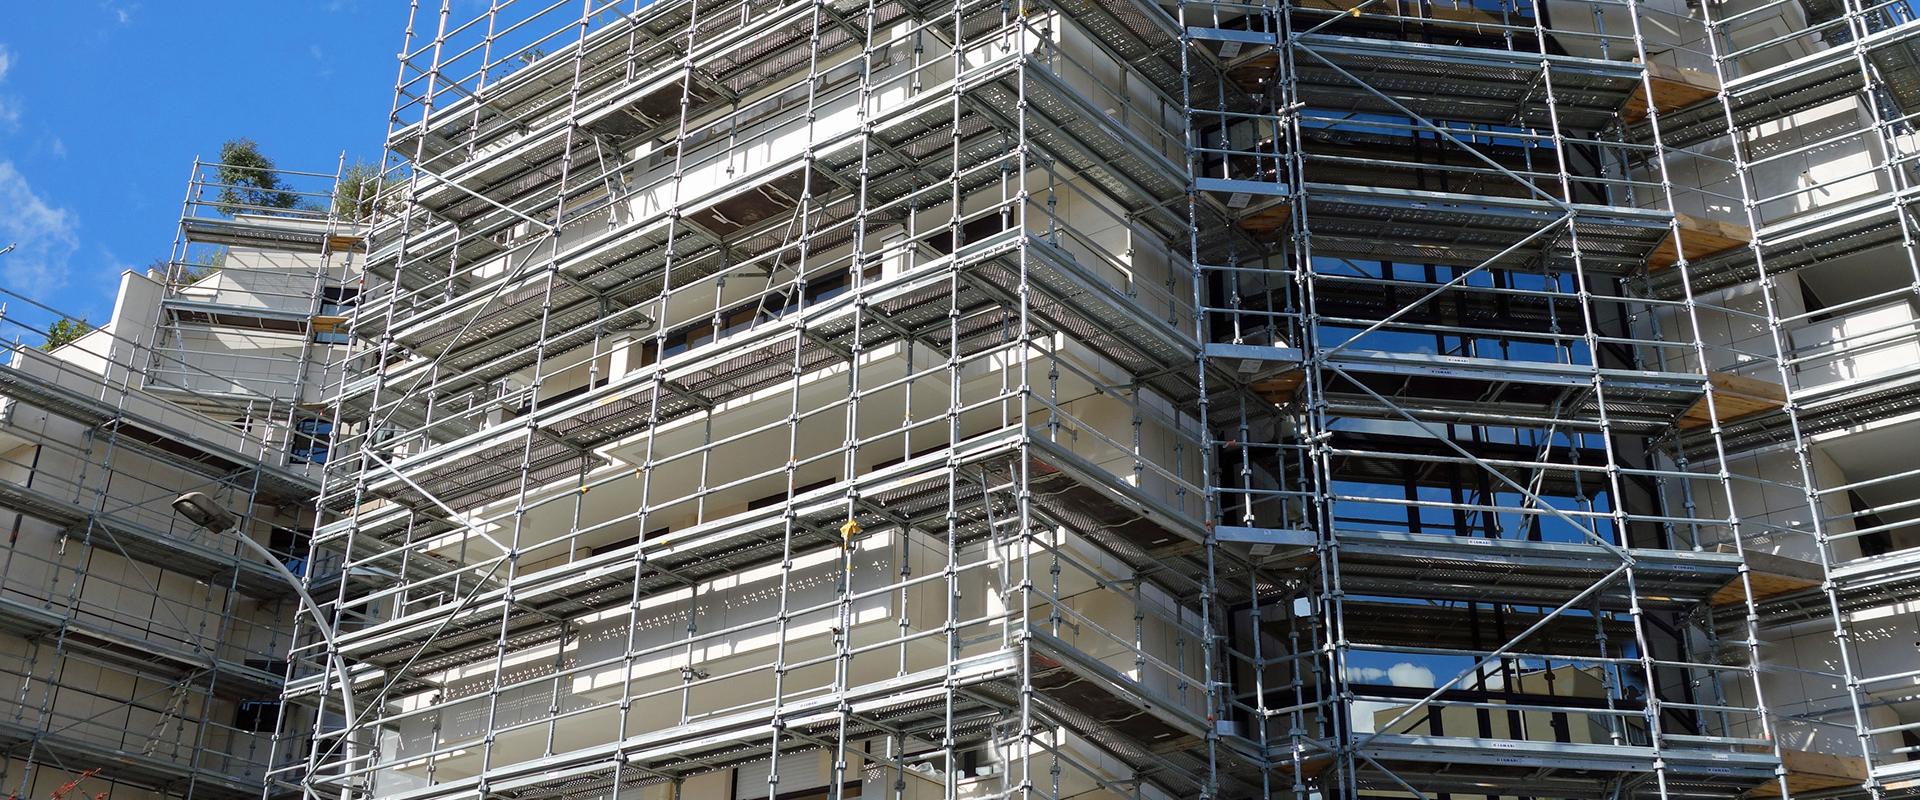 Scaffolding at a construction site, France